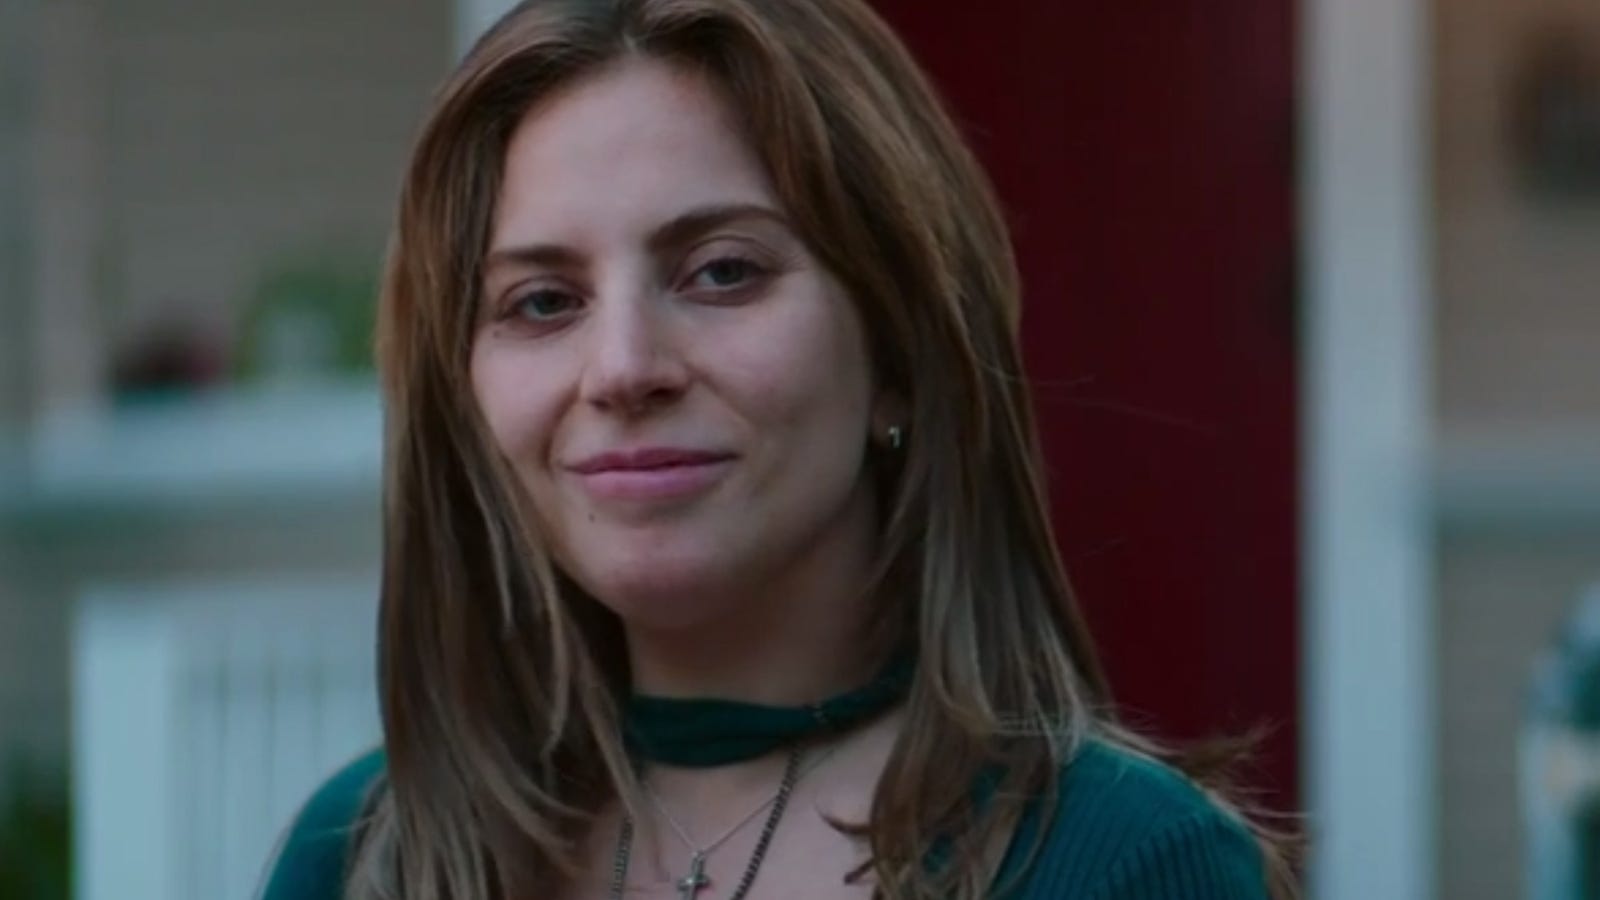 Where To Stream the Older Versions of 'A Star Is Born'